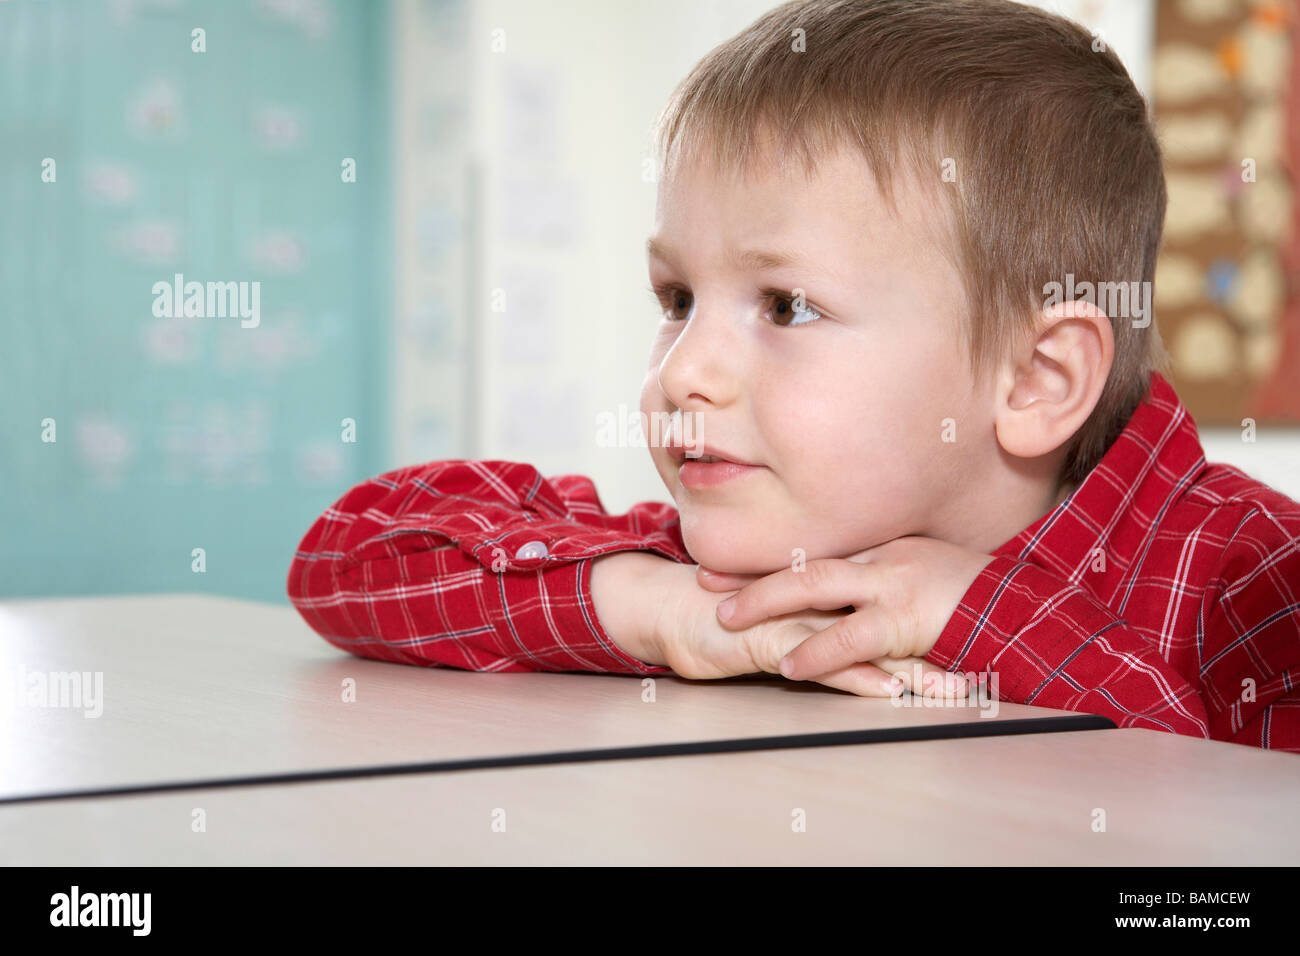 Boy Sitting At Desk, Looking Into Distance Stock Photo